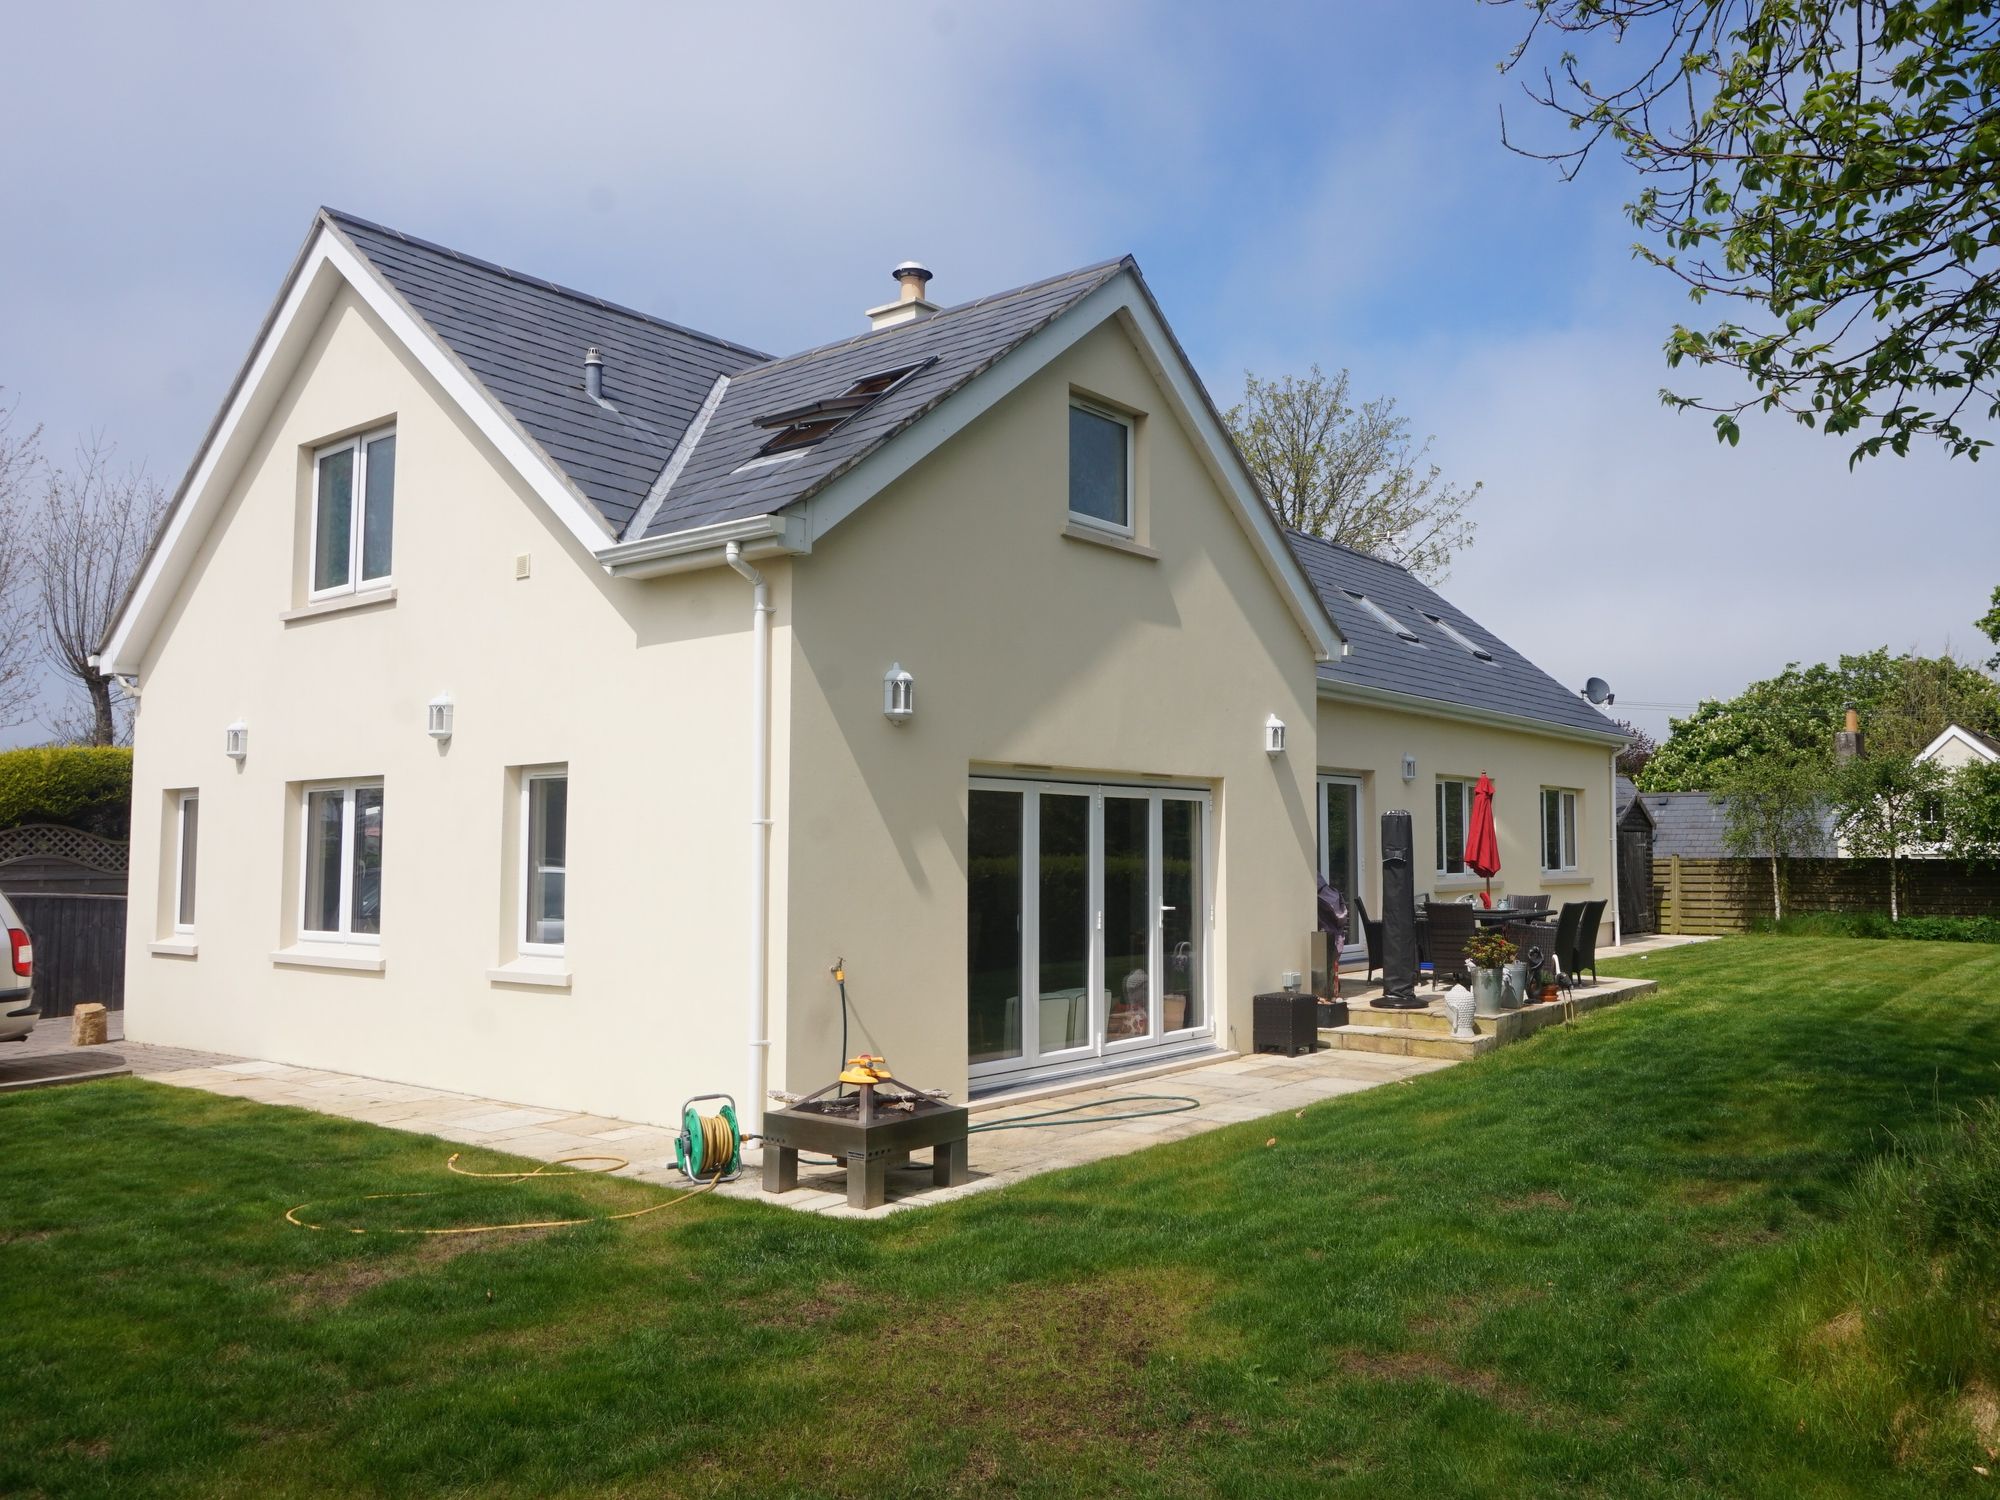 4 bed Property For Rent in St. Mary, Jersey